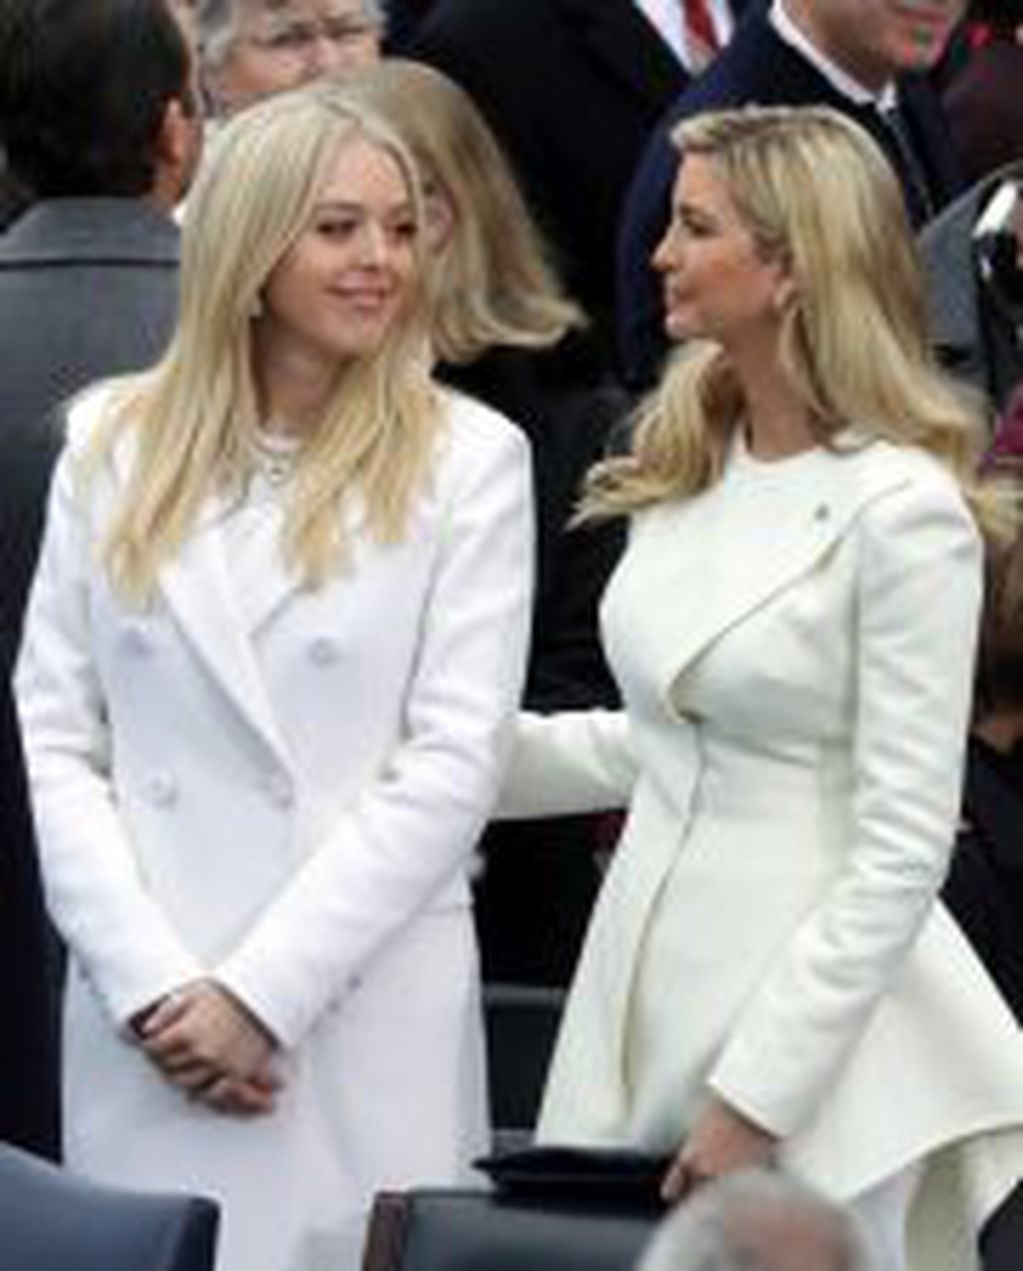 WASHINGTON, DC - JANUARY 20: (L-R) Tiffany Trump and Ivanka Trump arrive on the West Front of the U.S. Capitol on January 20, 2017 in Washington, DC. In today's inauguration ceremony Donald J. Trump becomes the 45th president of the United States.   Chip Somodevilla/Getty Images/AFP
== FOR NEWSPAPERS, INTERNET, TELCOS & TELEVISION USE ONLY ==